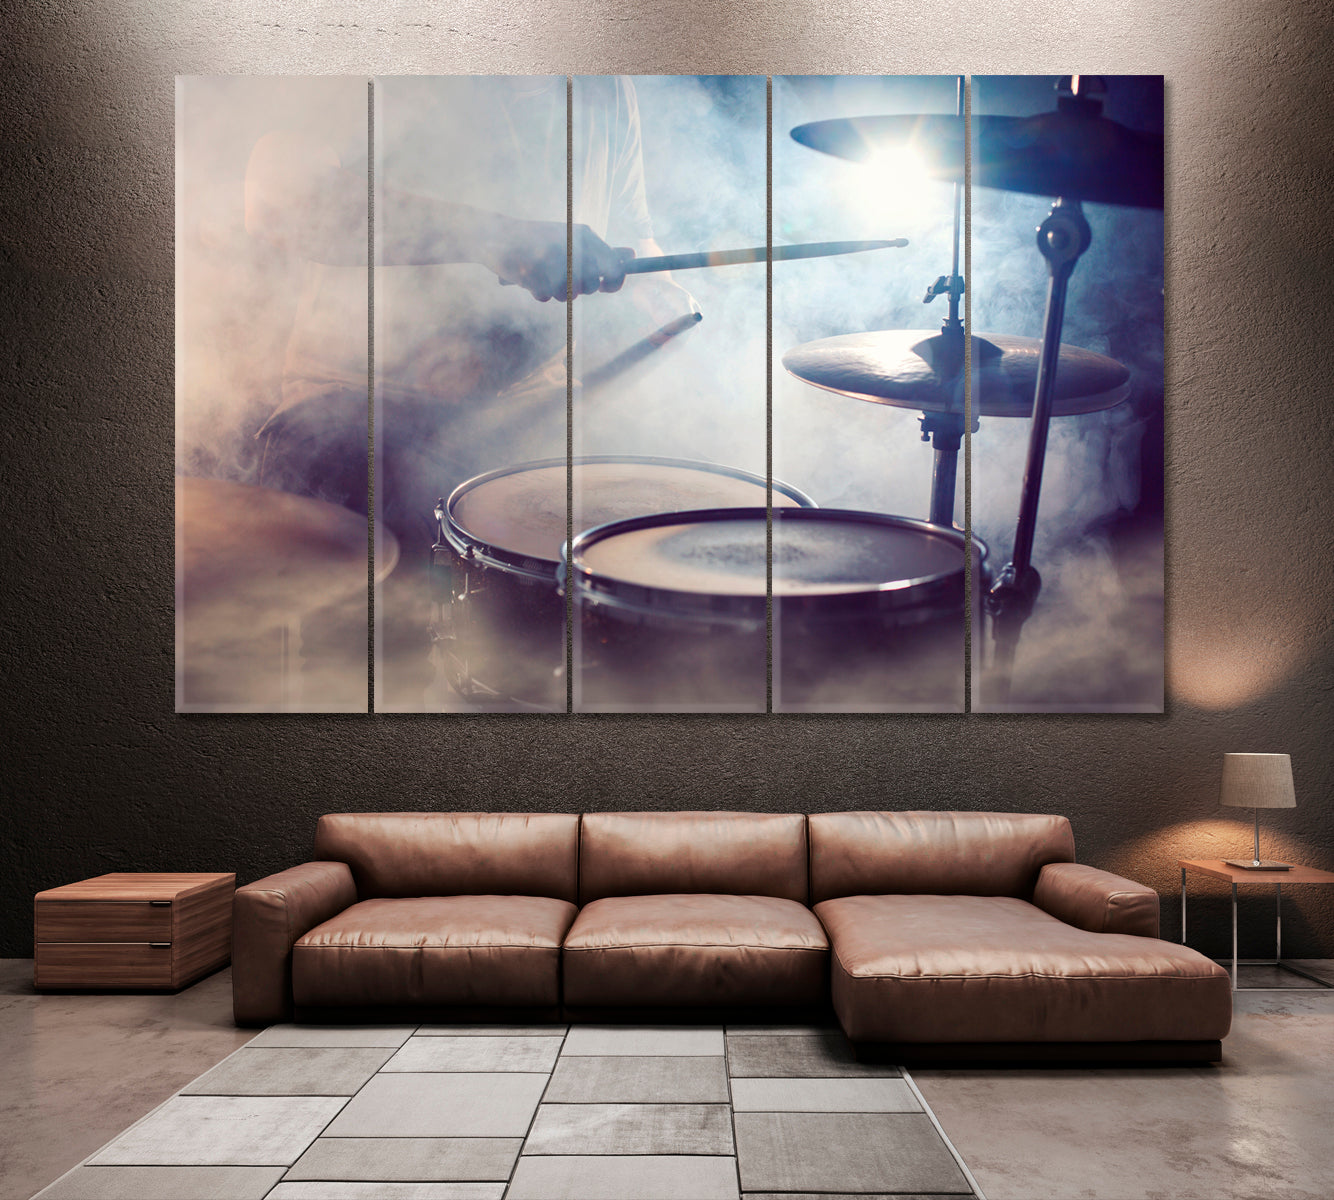 Drum Set in Fog Canvas Print ArtLexy 5 Panels 36"x24" inches 